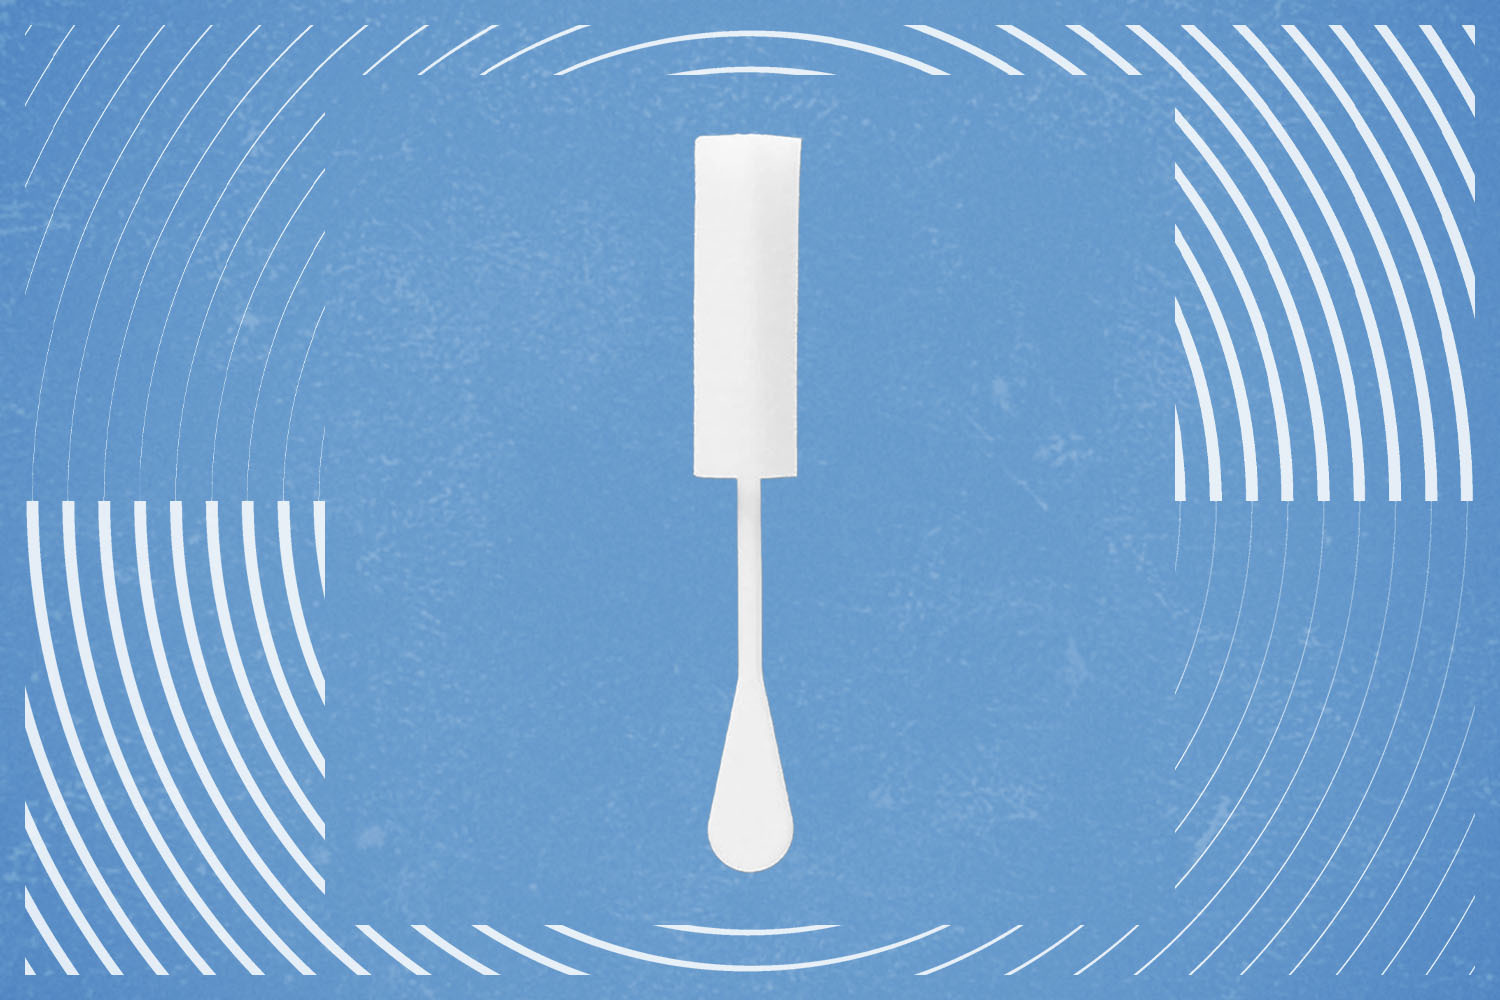 A photo of a Dripstick, a white sponge on a stick, on top of a blue background